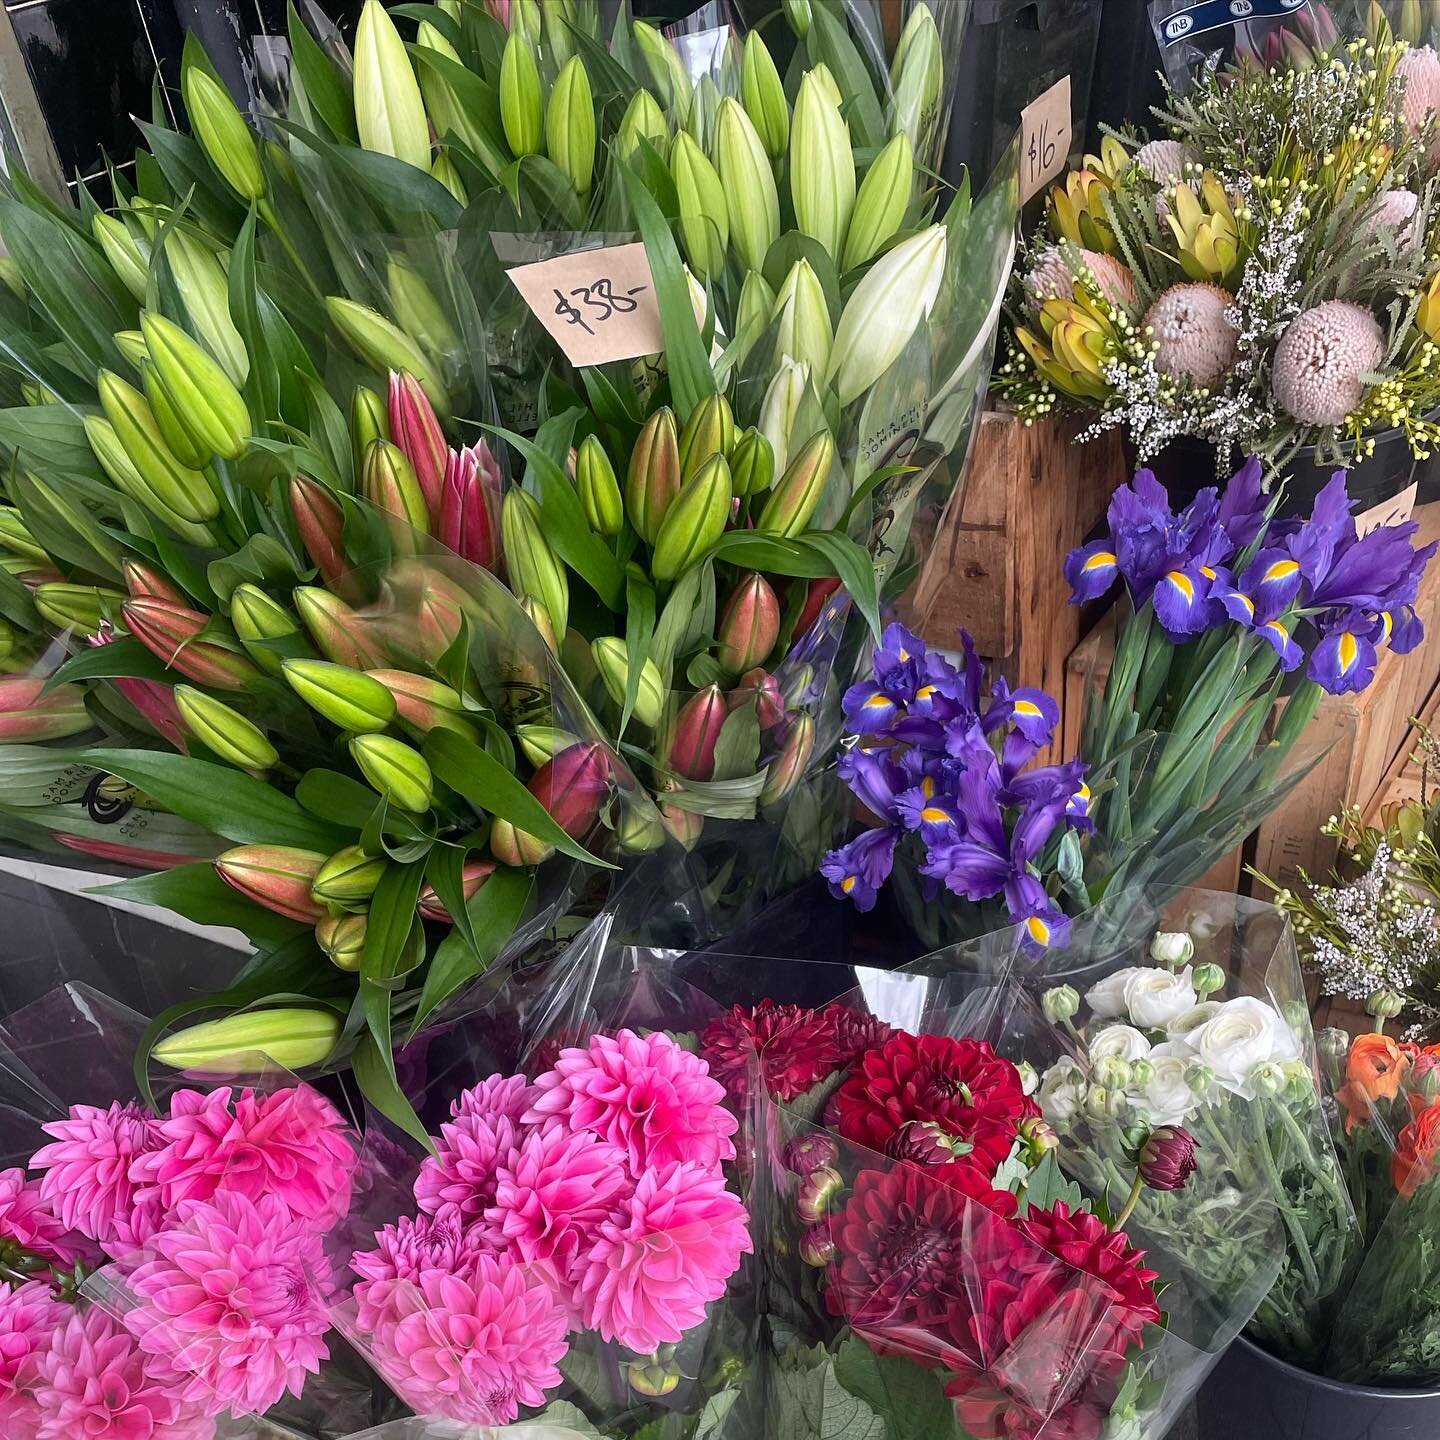 FIRST WEEKEND OF SPRING! 🌸 And it&rsquo;s Fathers Day on Sunday! ❤️ Beautiful blooms to brighten your home! 💐🥰